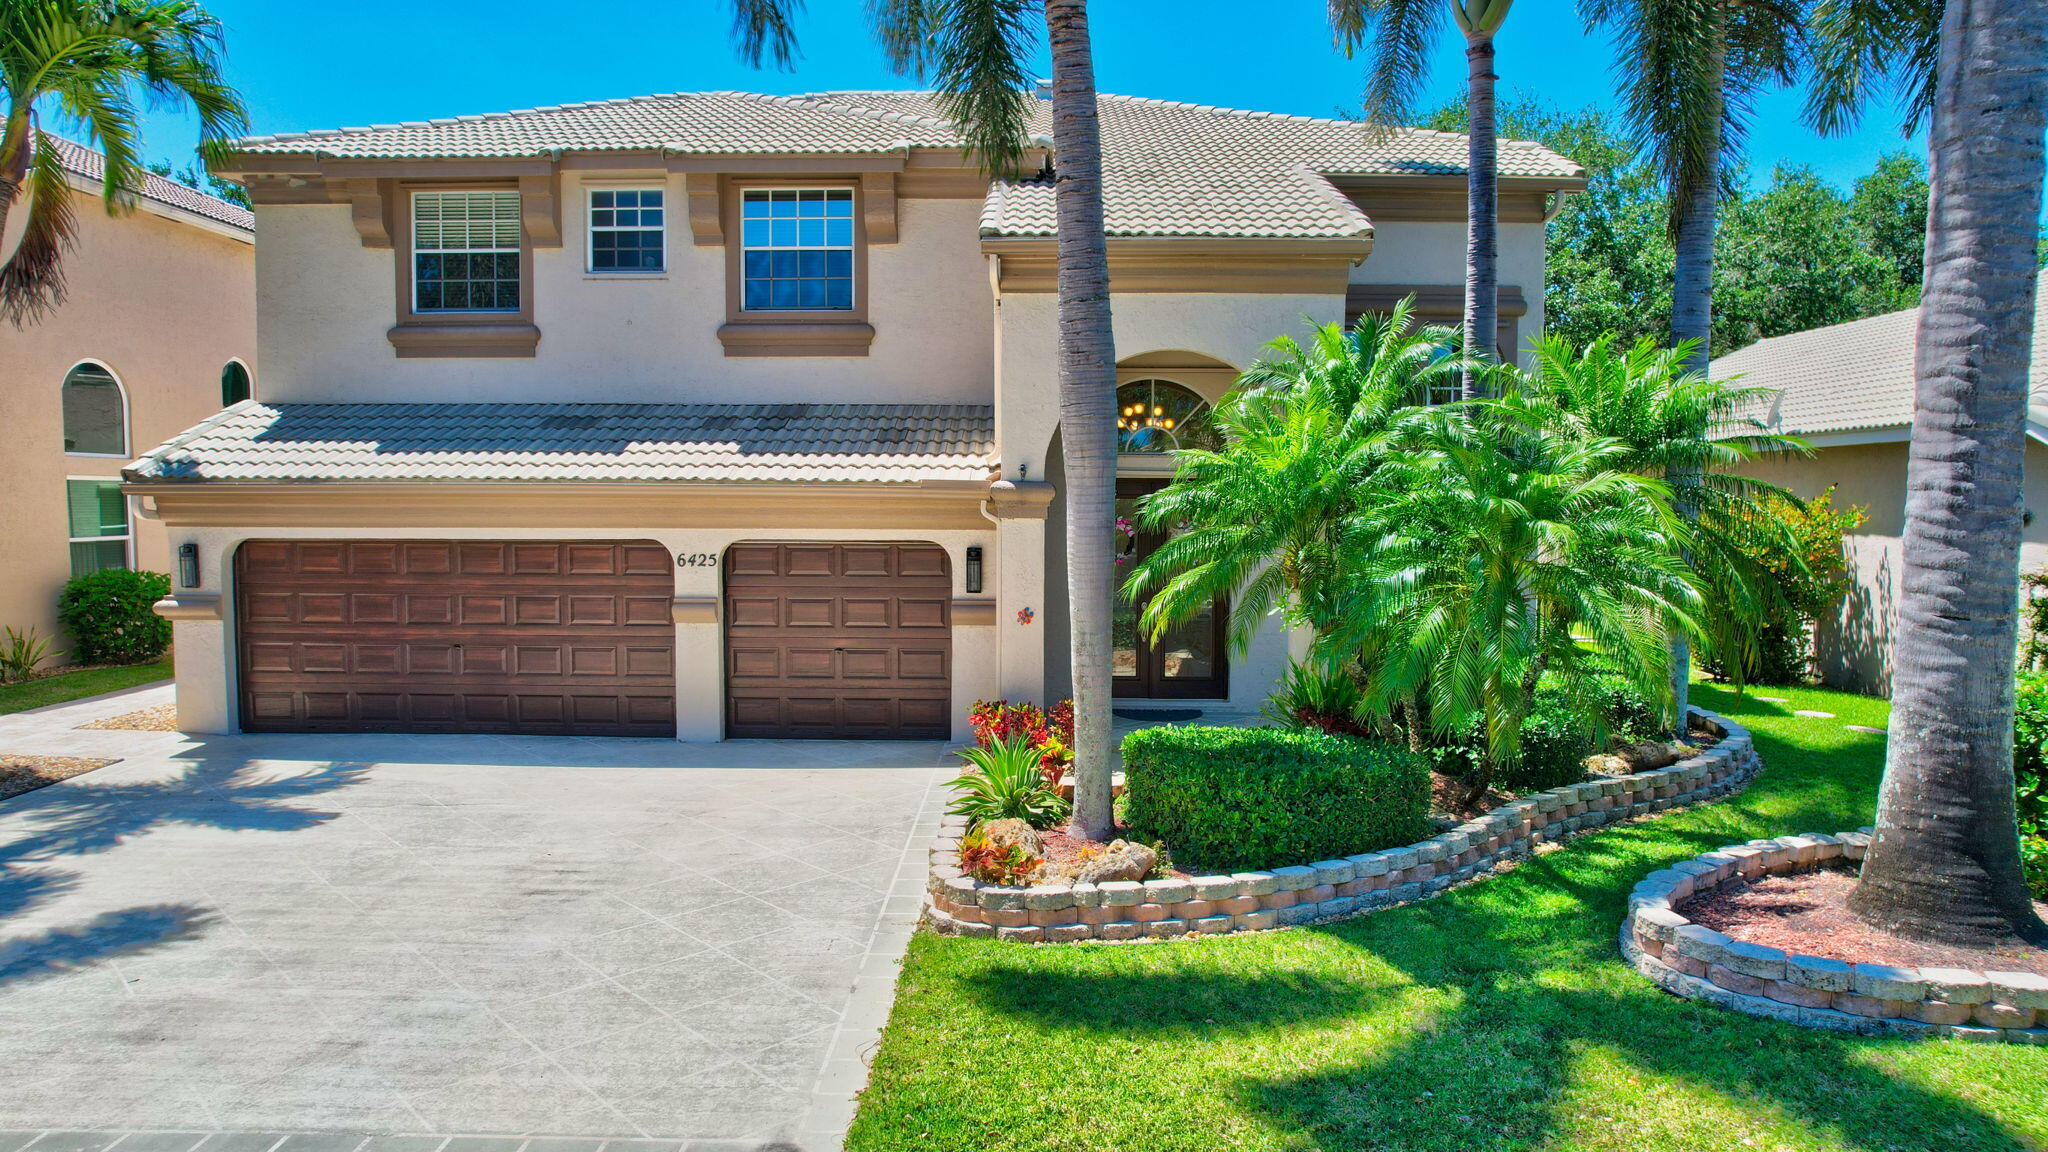 Property for Sale at 6425 Stonehurst Circle, Lake Worth, Palm Beach County, Florida - Bedrooms: 5 
Bathrooms: 3  - $860,000